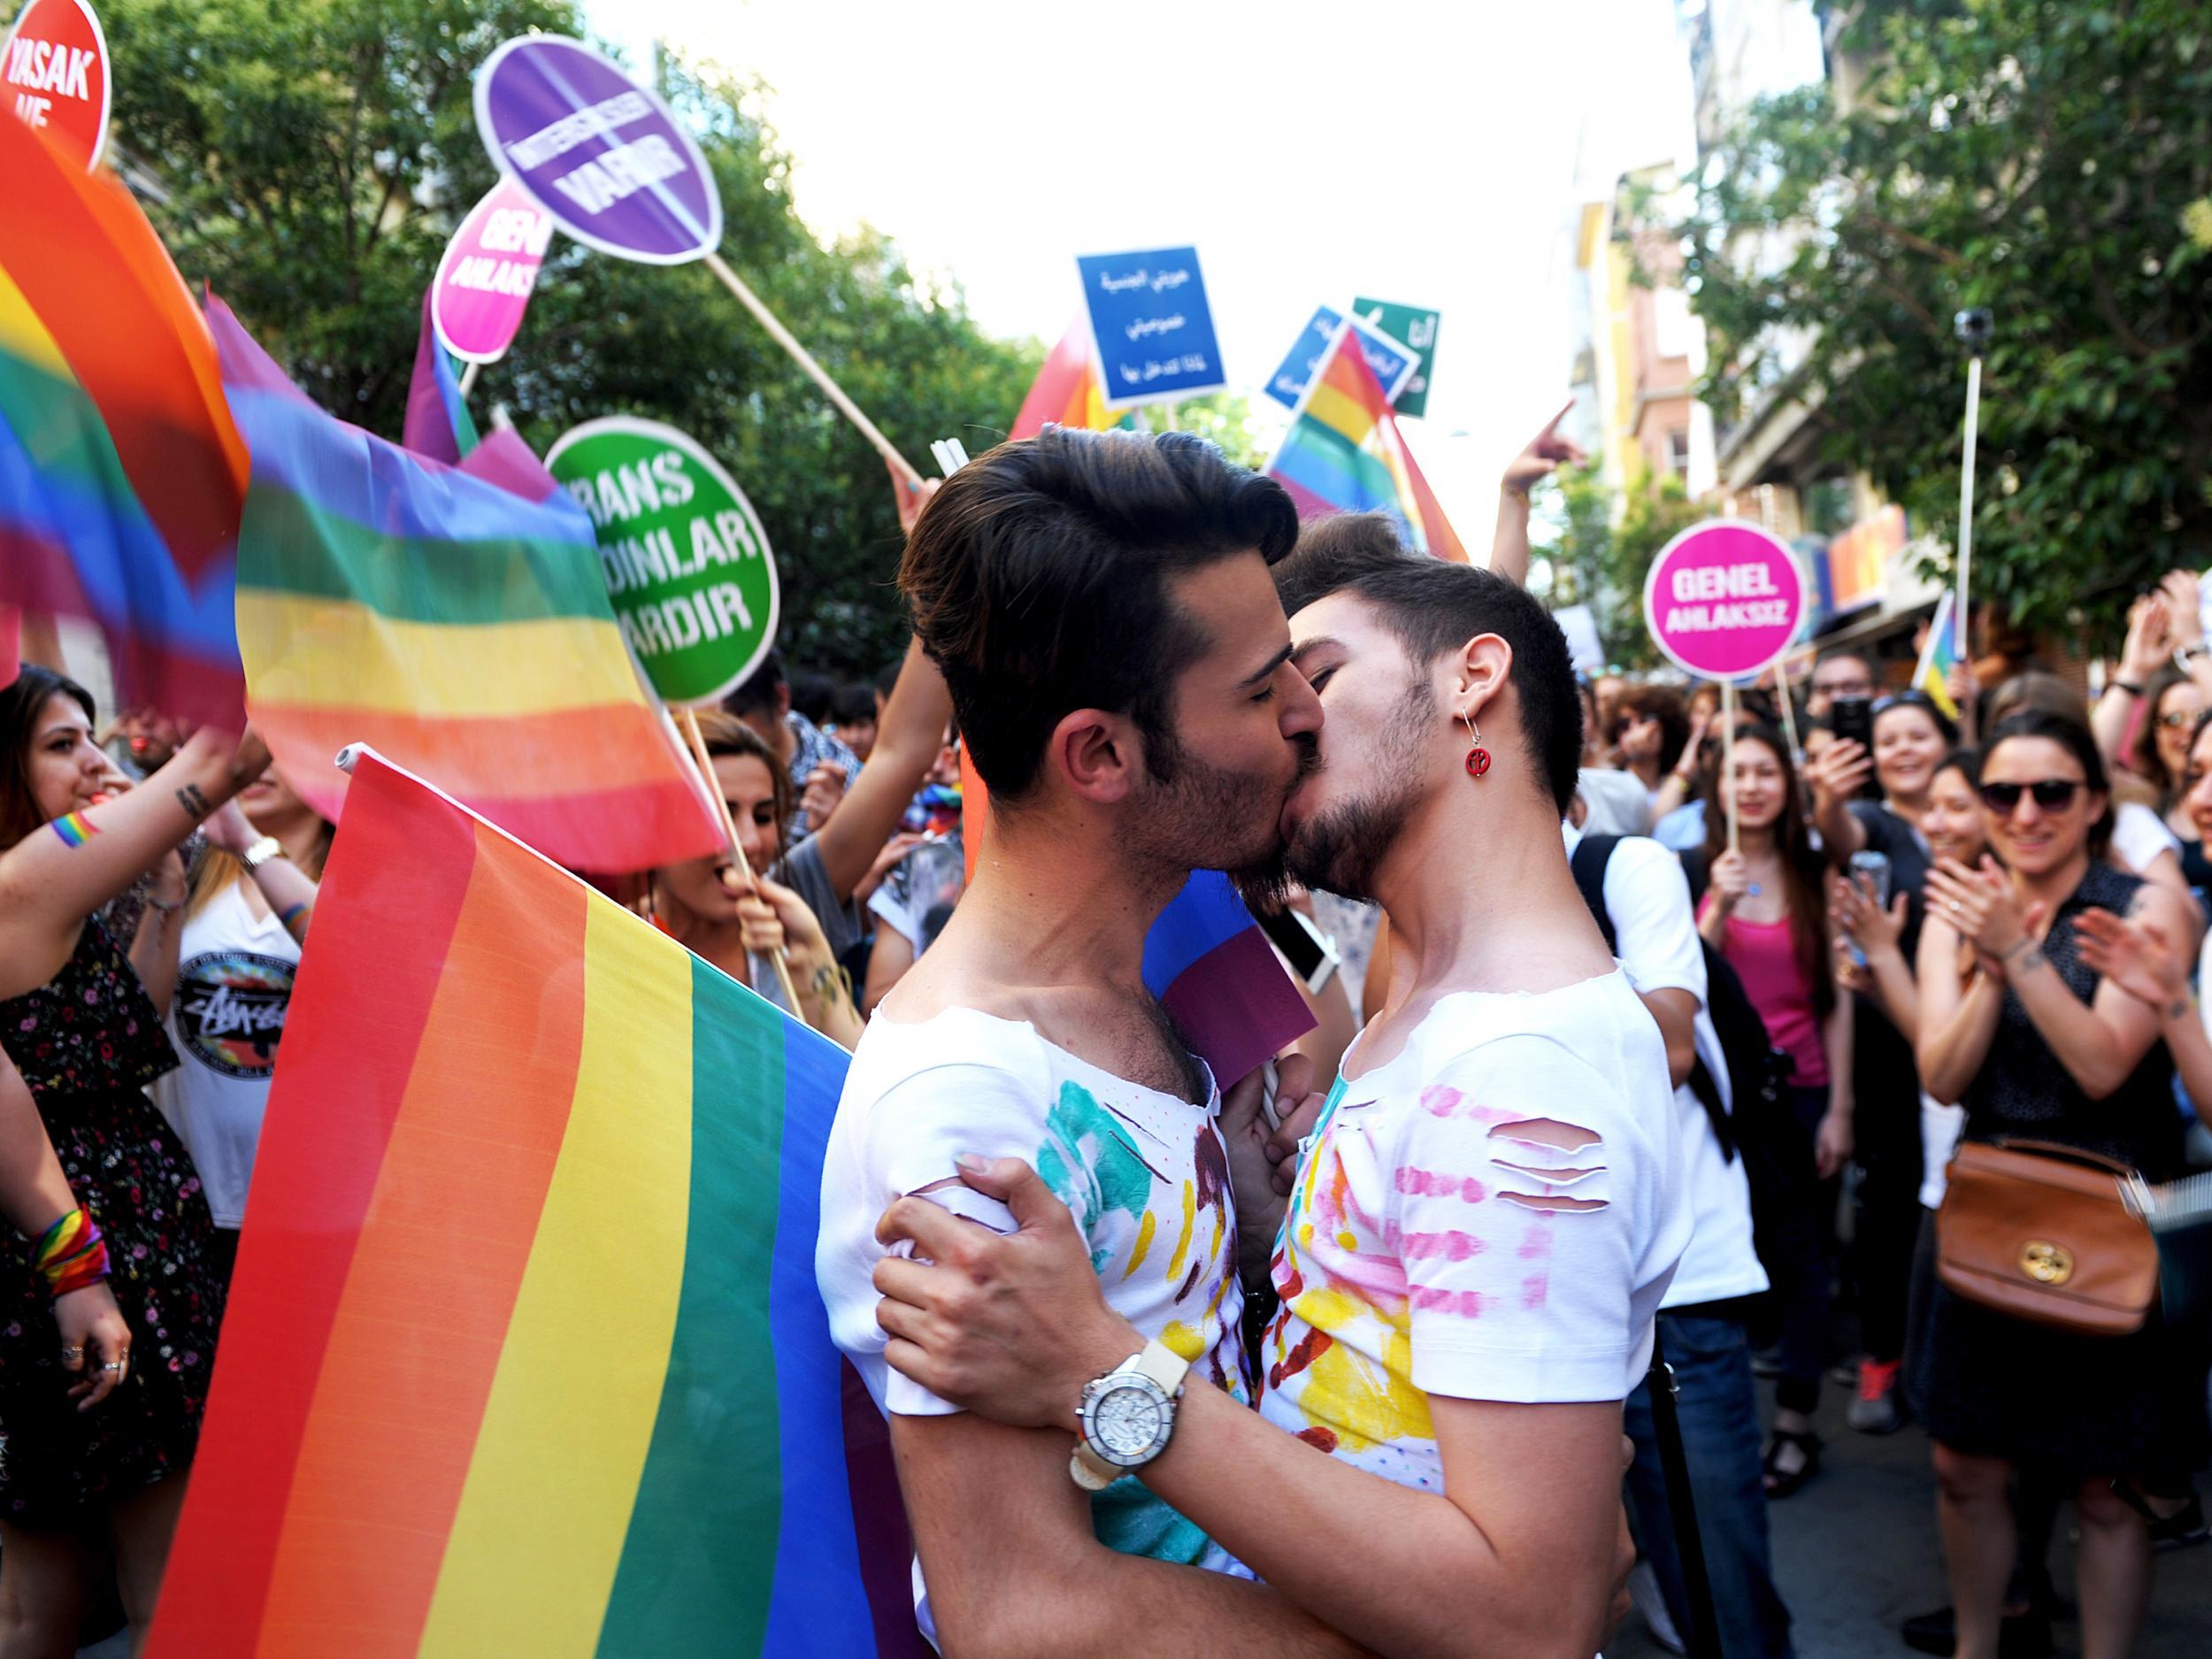 Istanbul Bans Annual Gay Pride March On Security Grounds The Independent The Independent